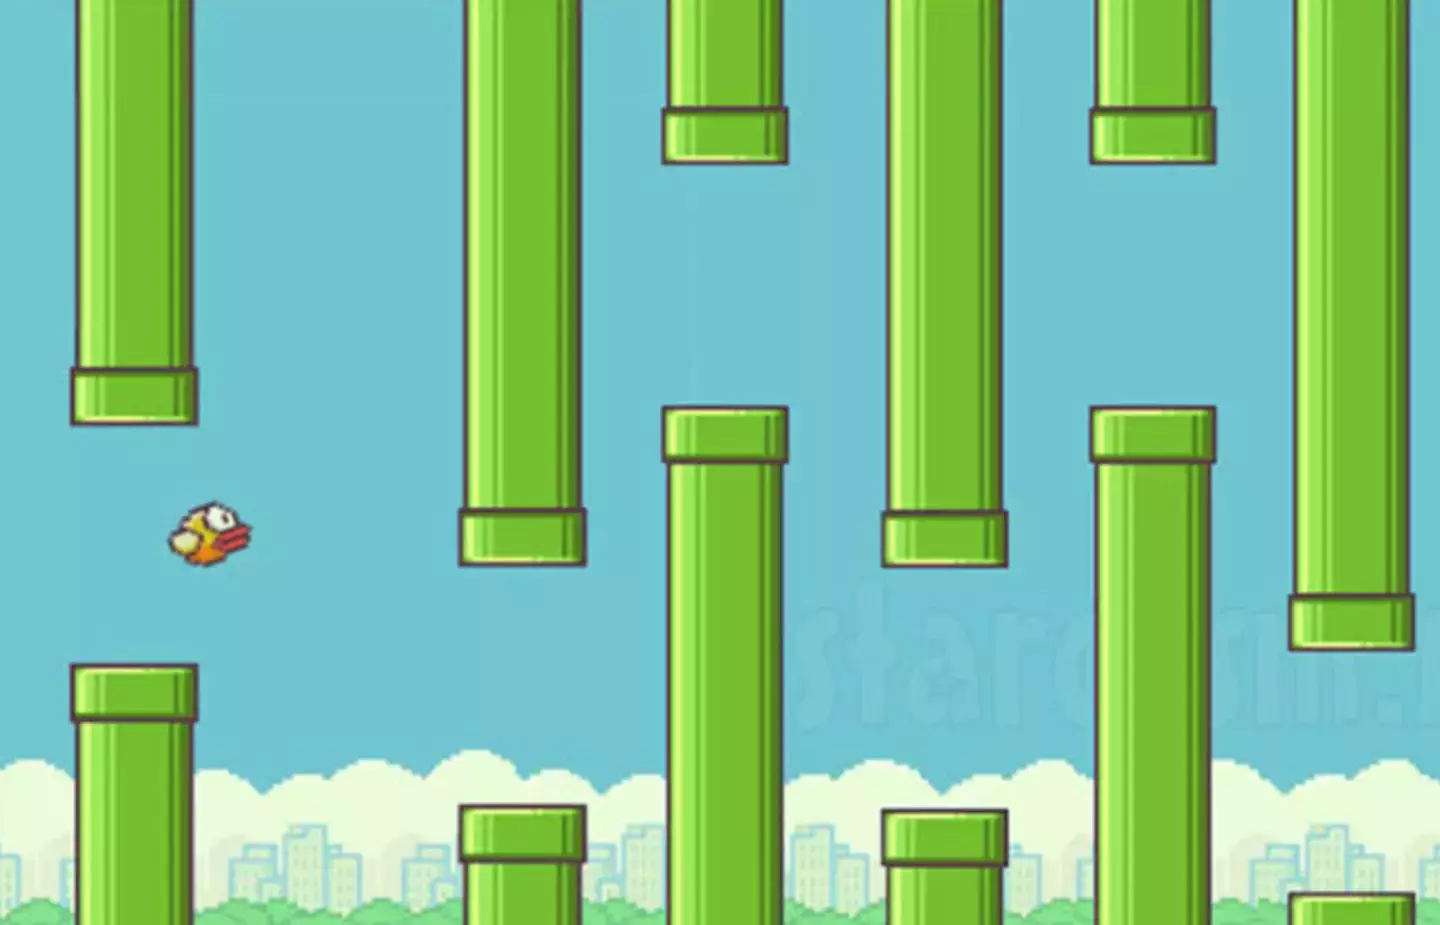 Flappy Bird turns 11 in just a matter of days, meaning it would be old enough to join a secondary school come September. (Flappy Bird)